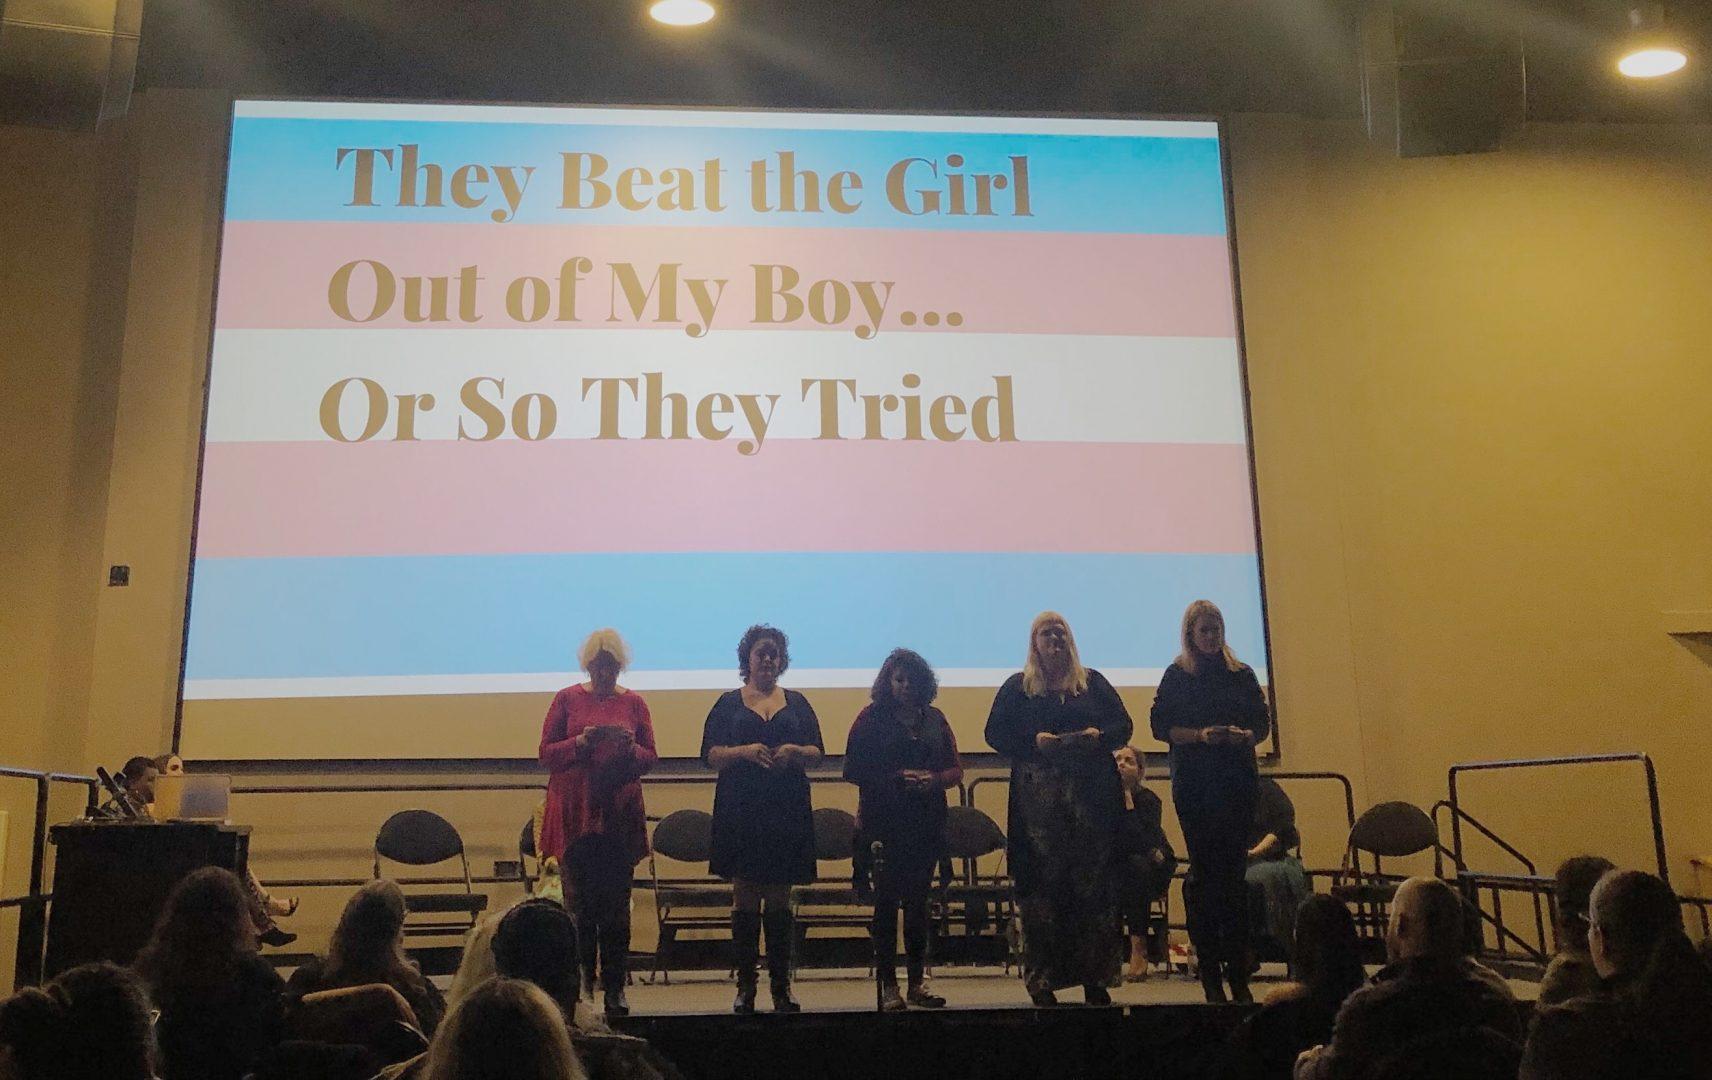 (Left to right) Kathie Mollica, Jessica Johnson, Heather Roberts-Shorts, Melanie Ramsey, and Celestial Bracamonte performing “They Beat the Girl Out of my Boy.”
